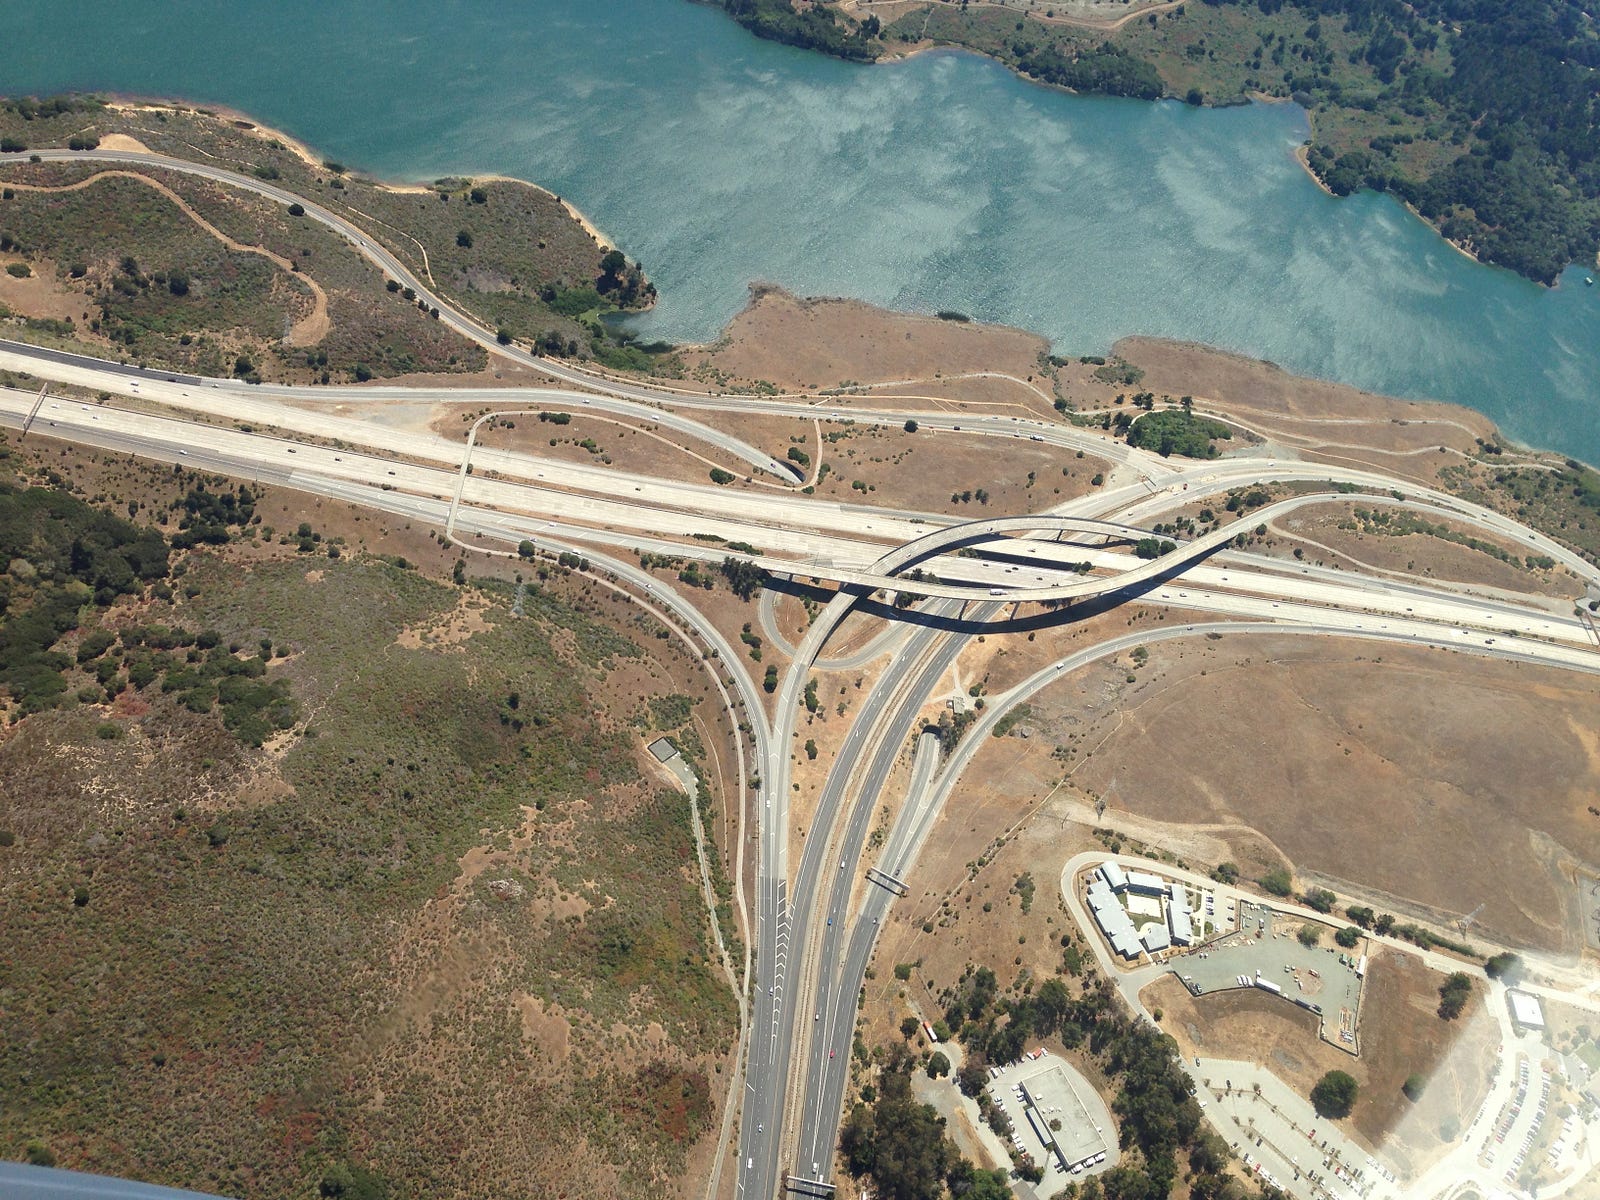 Mapping 1 000 Km Of Highway With A Drone Dronedeploy S Blog - the client one of mexico s public government agencies requested that these large sections of highway be mapped in high resolution to inspect